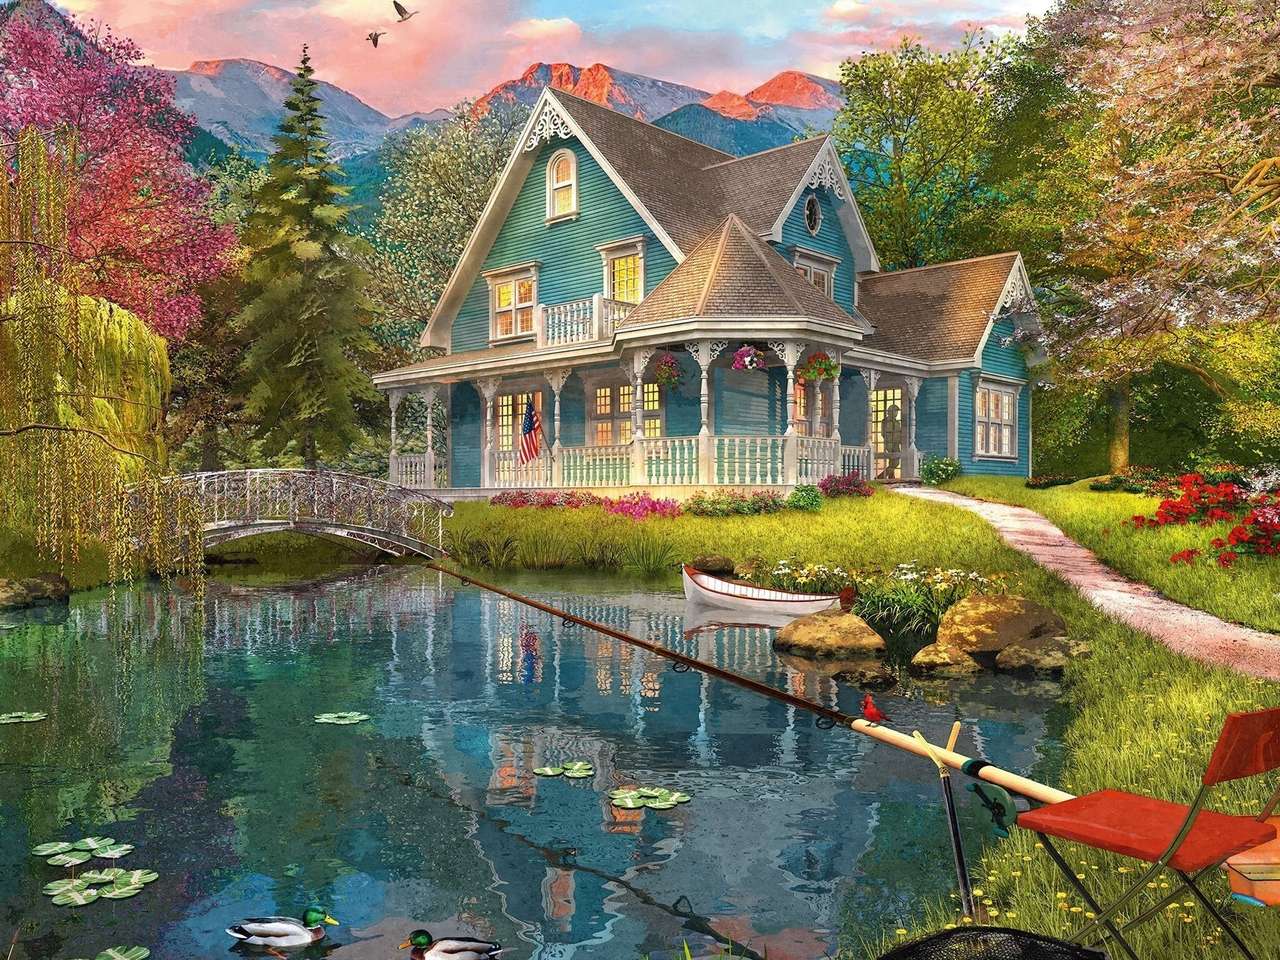 Cottage in the mountains by the pond jigsaw puzzle online